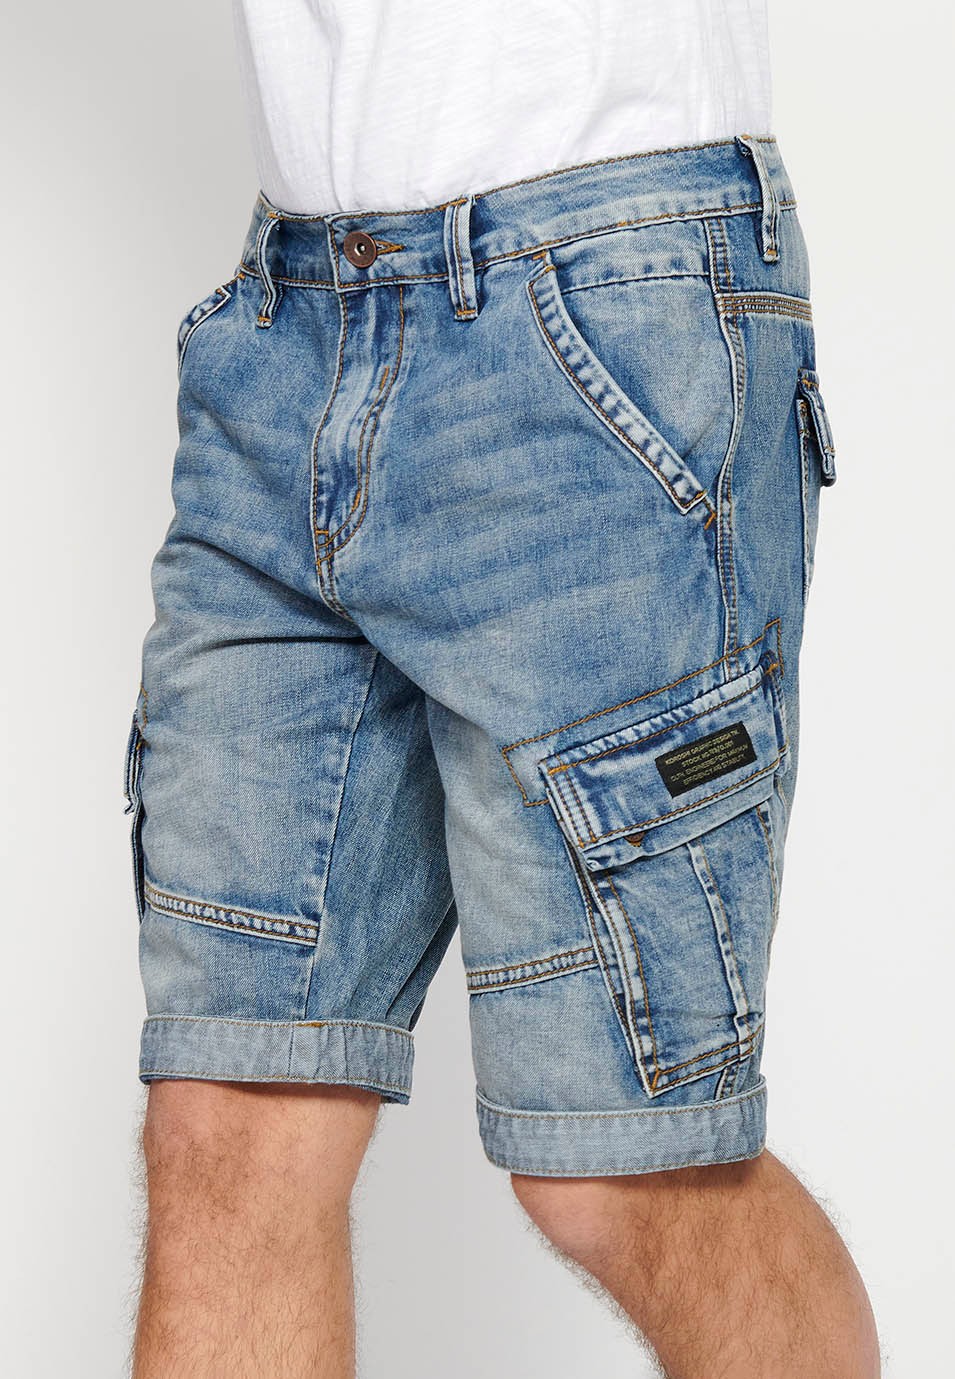 Denim Bermuda cargo shorts with front zipper and button closure with five pockets, one blue pocket pocket for Men 8